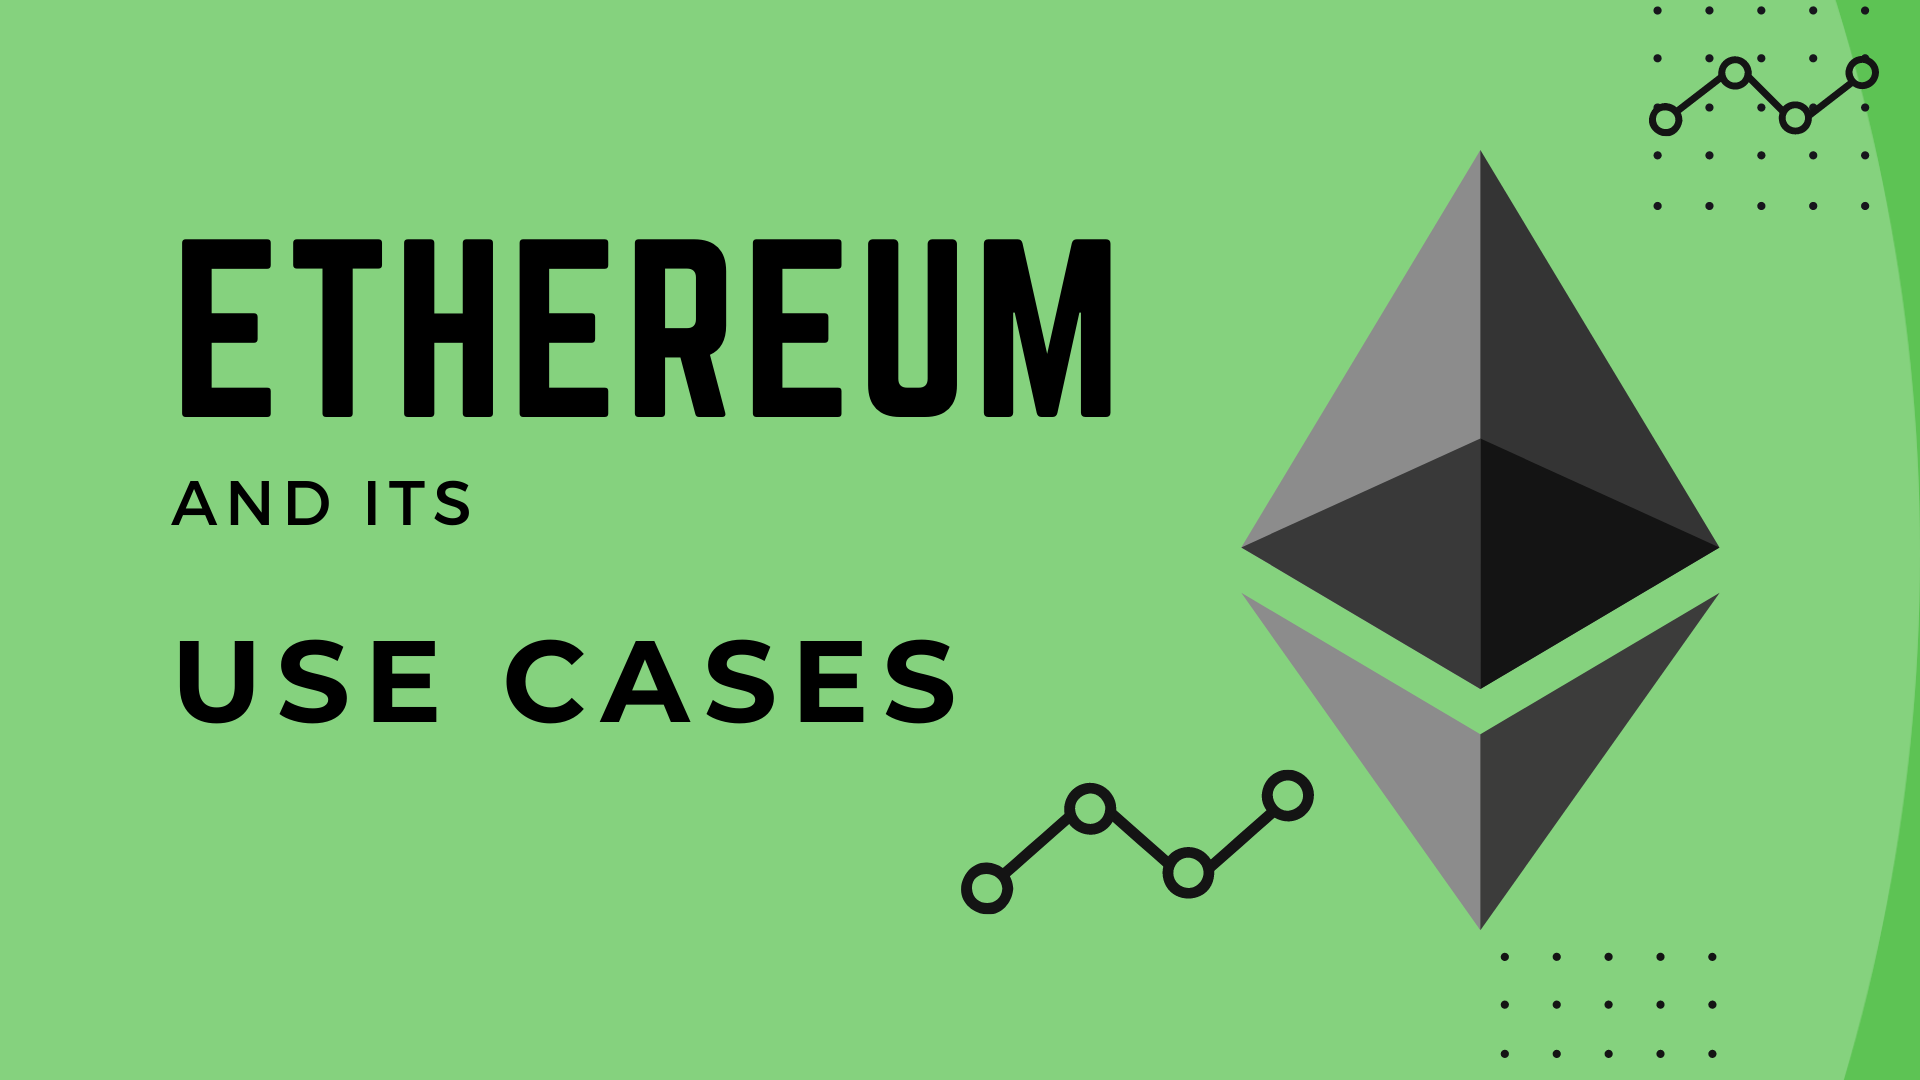 what can ethereum be used for